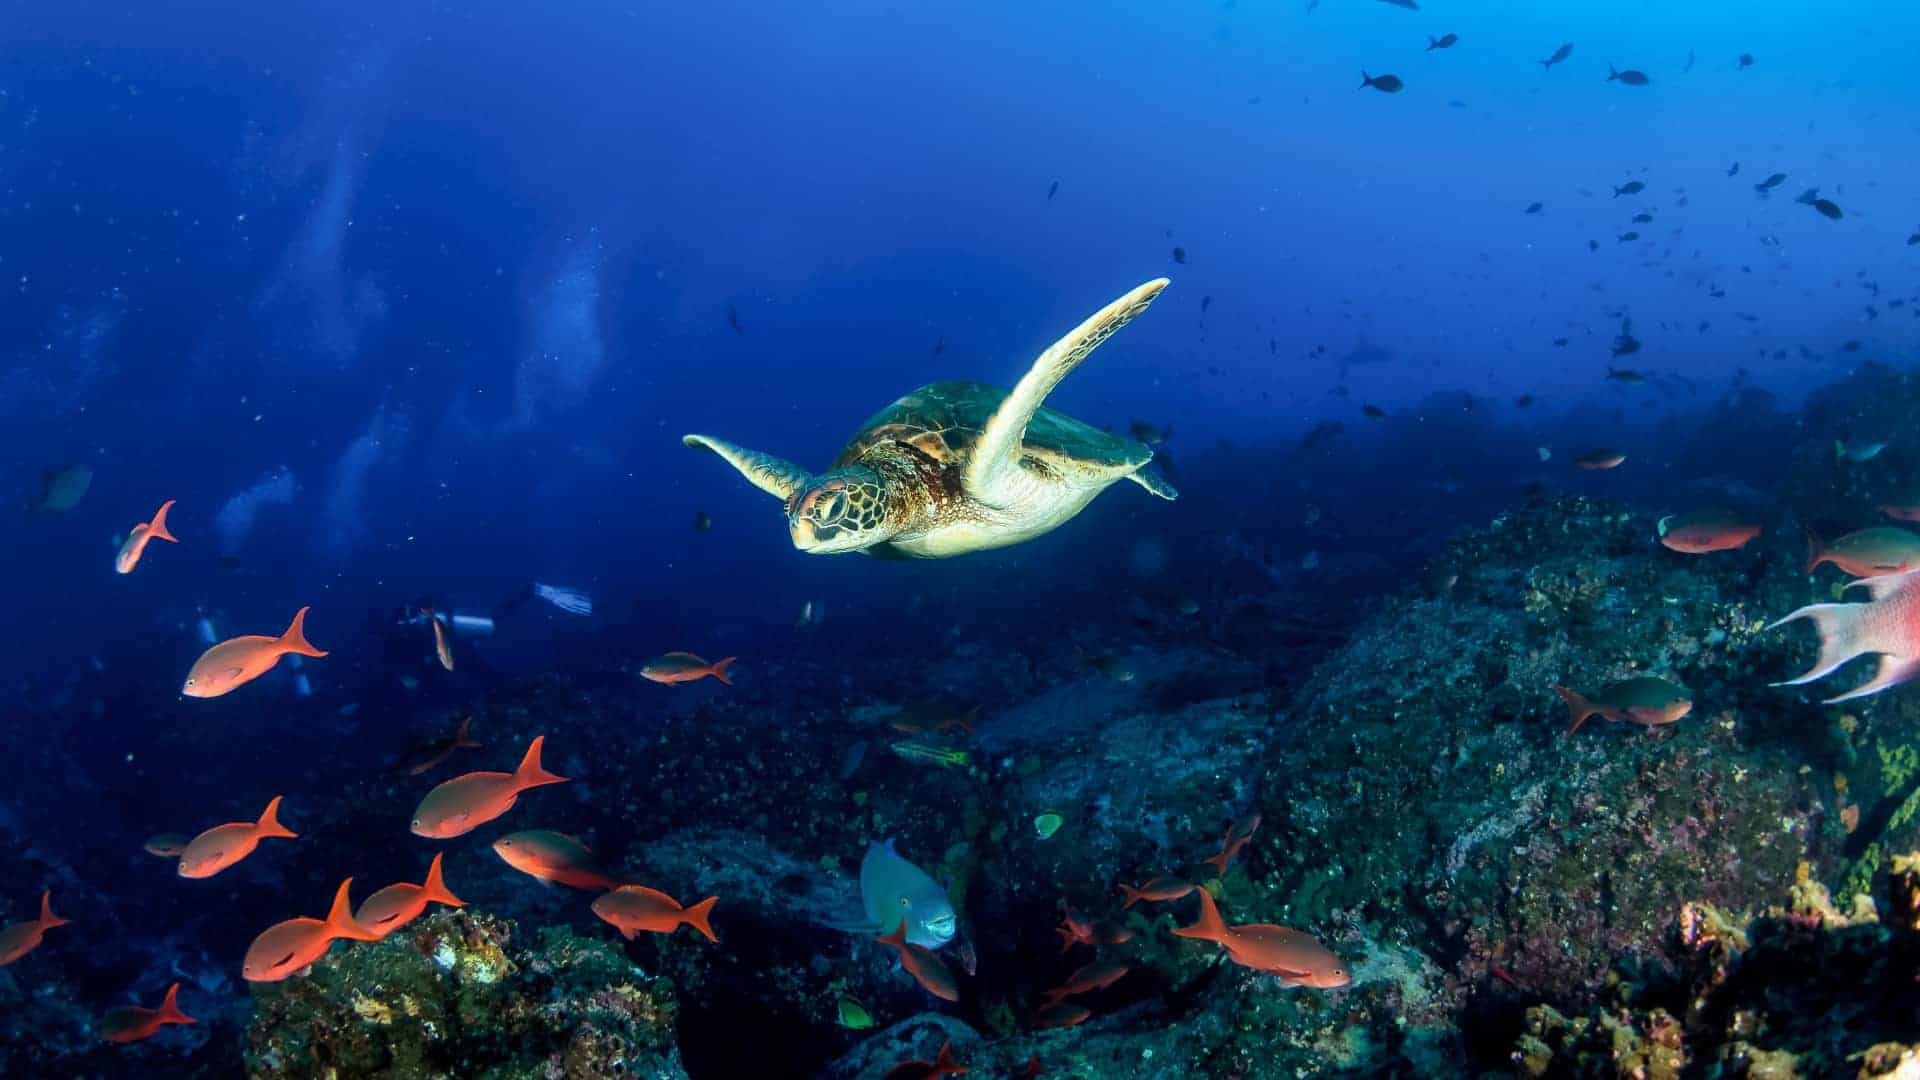 A green sea turtle is swimming gracefully in the clear, deep blue waters of the ocean, with its flippers extended as if in mid-stroke. Below it, a rocky coral reef teeming with marine life serves as a vivid backdrop, populated by schools of bright orange and red fish, some of which are elegantly drifting by in the foreground.